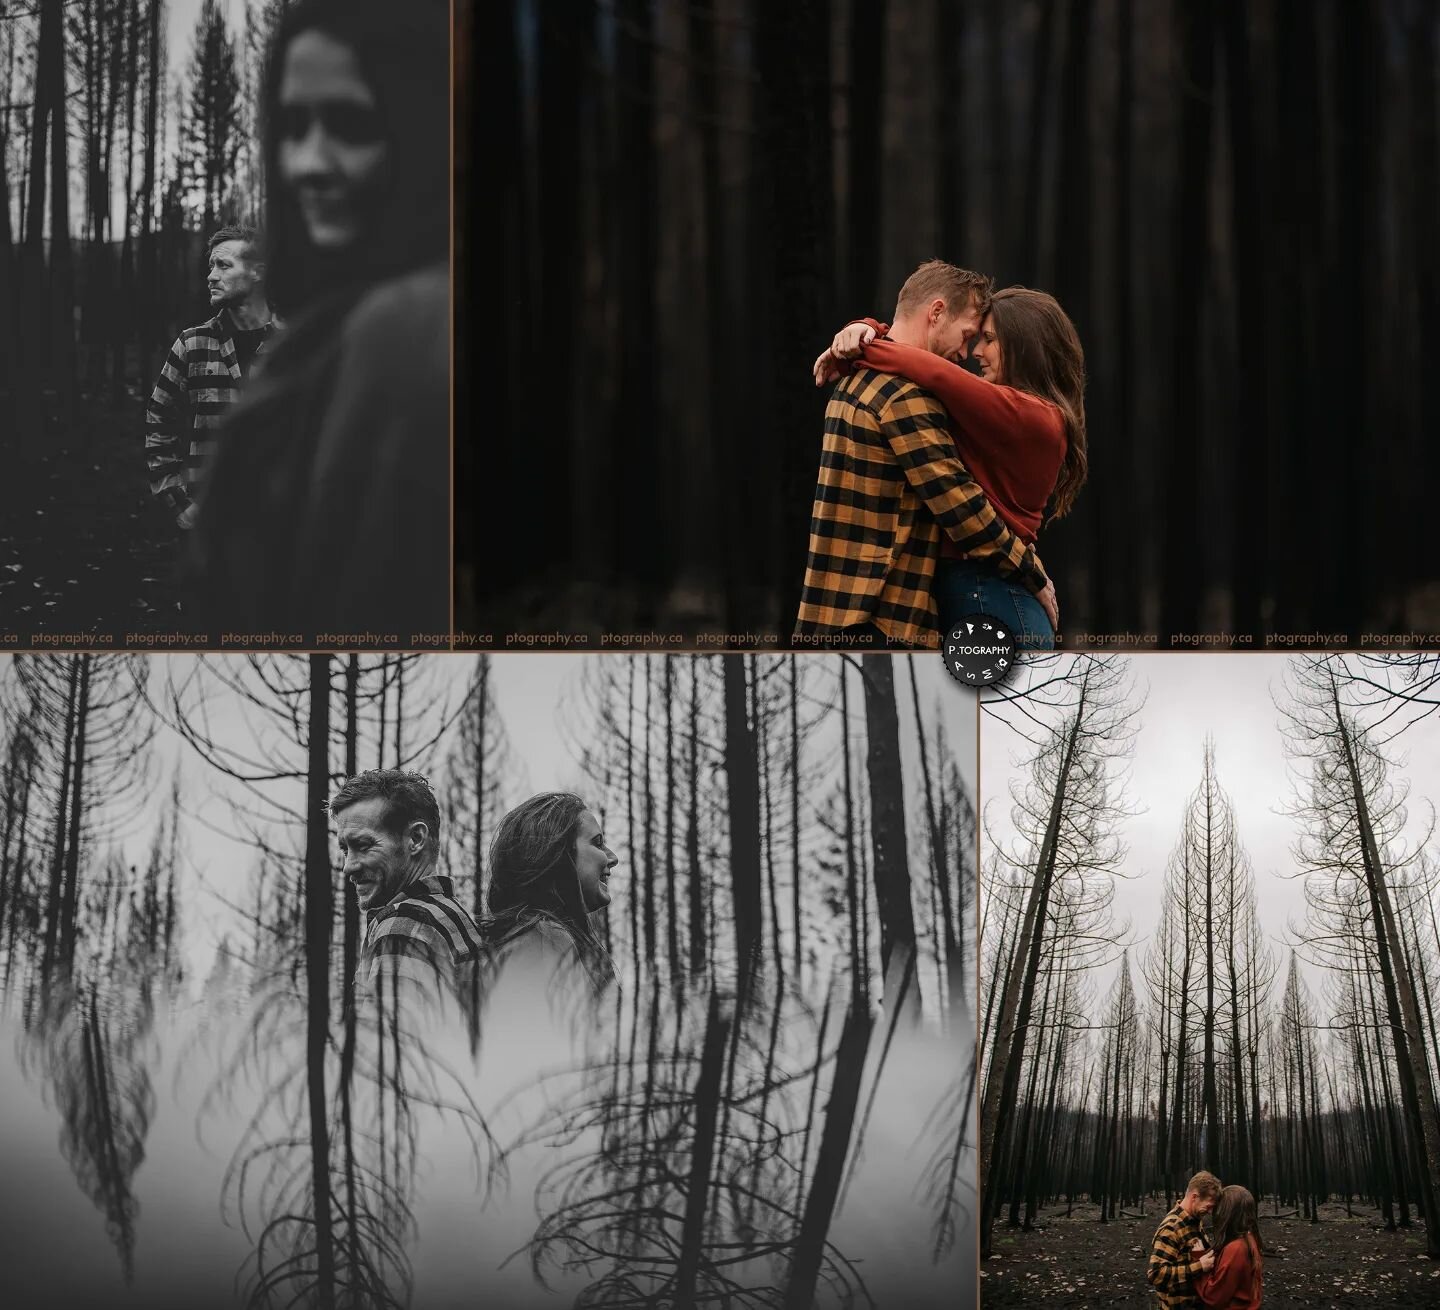 After weeks of a colorful palette to work with, I took the opportunity to snap a few couples photos of my pumpkin head participants prior to our spooky shoot. 

Haunting, yet beautiful at the same time.